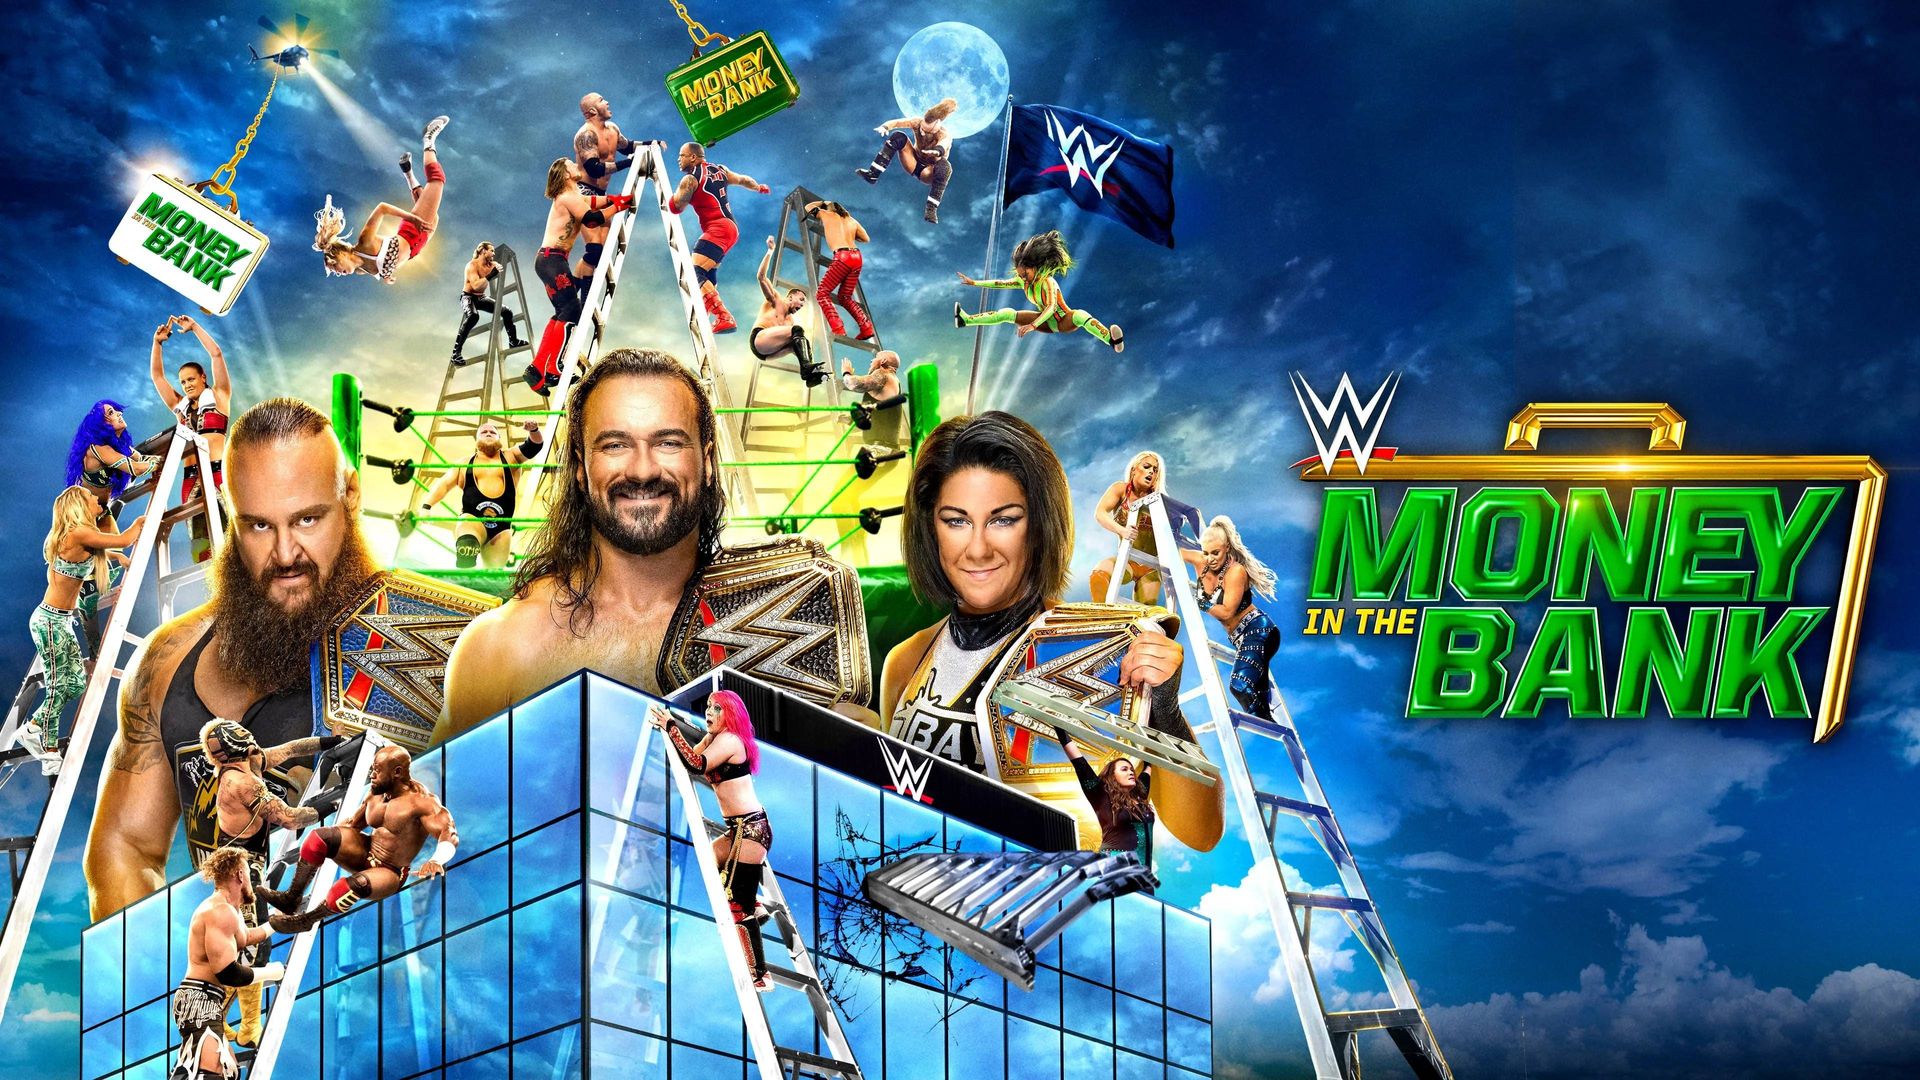 WWE: Money in the Bank background